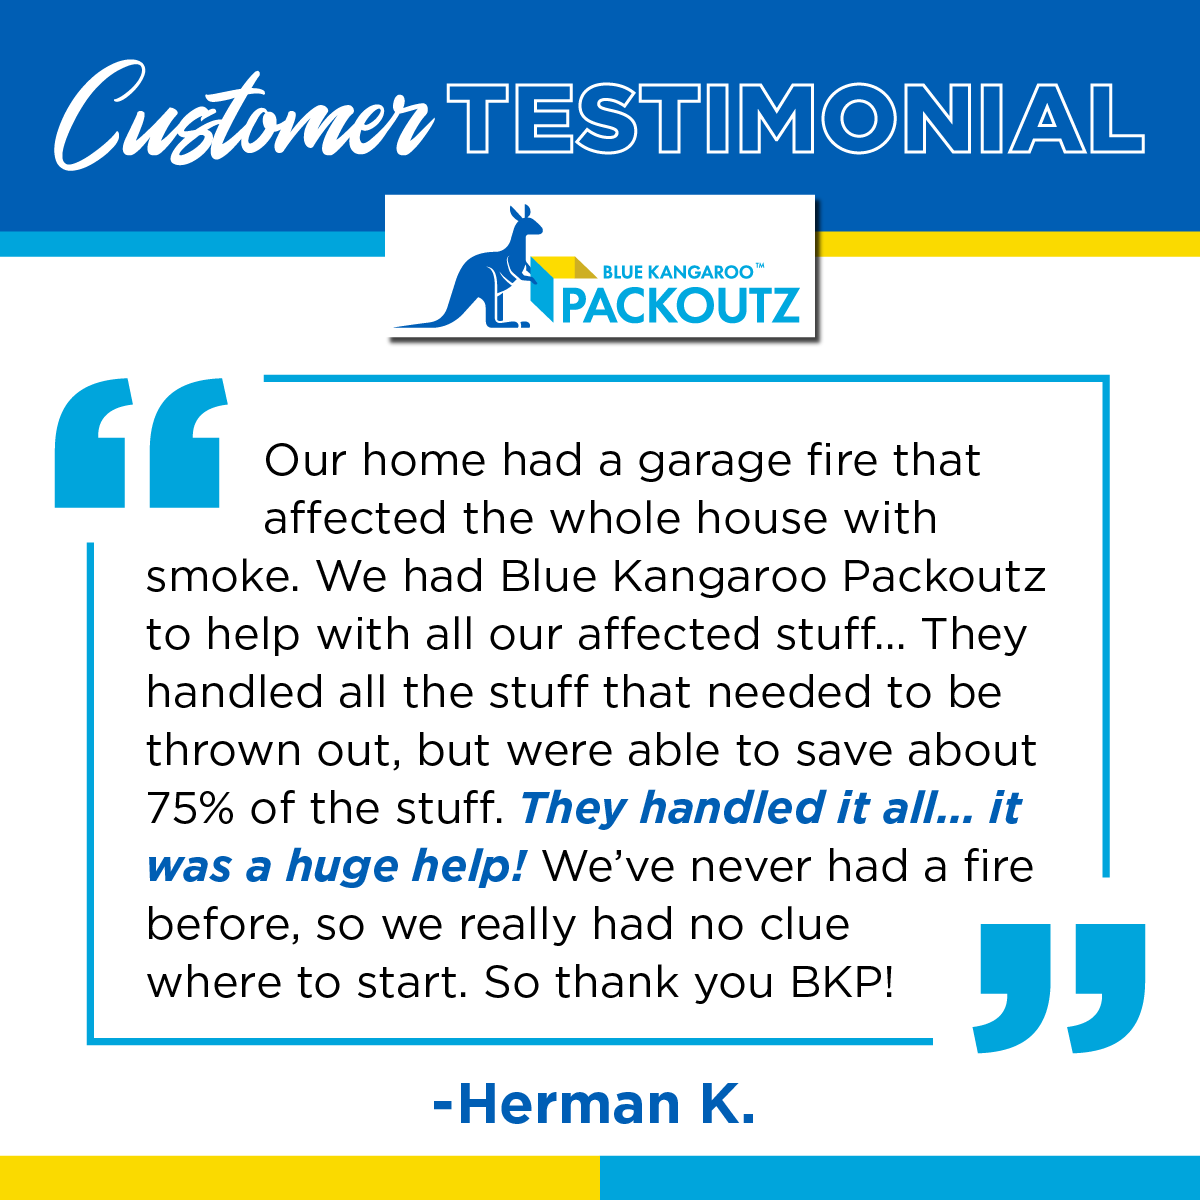 Customers rely on us during unusually stressful times in their lives. Because of this, it means a lot when we hear from satisfied clients like Herman! #BKP #WeCareAboutWhatWeCarry #ContentsRestoration #InsuranceClaim #PropertyDamage #FresnoCounty